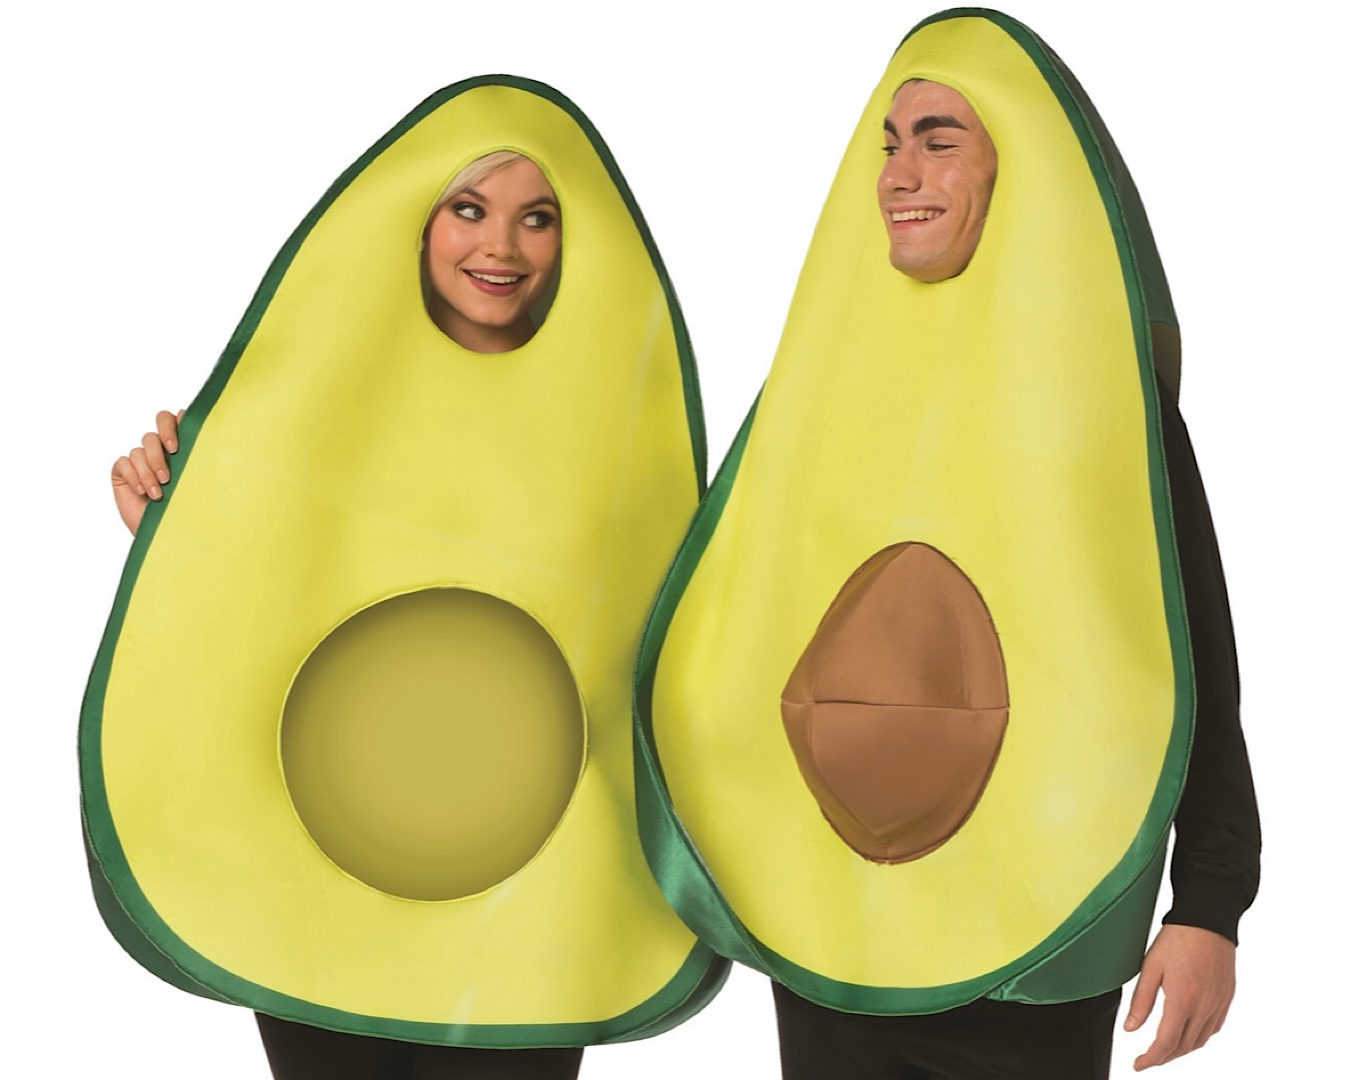 Two people wearing a Halloween costume made up of two halves of an avocado. 